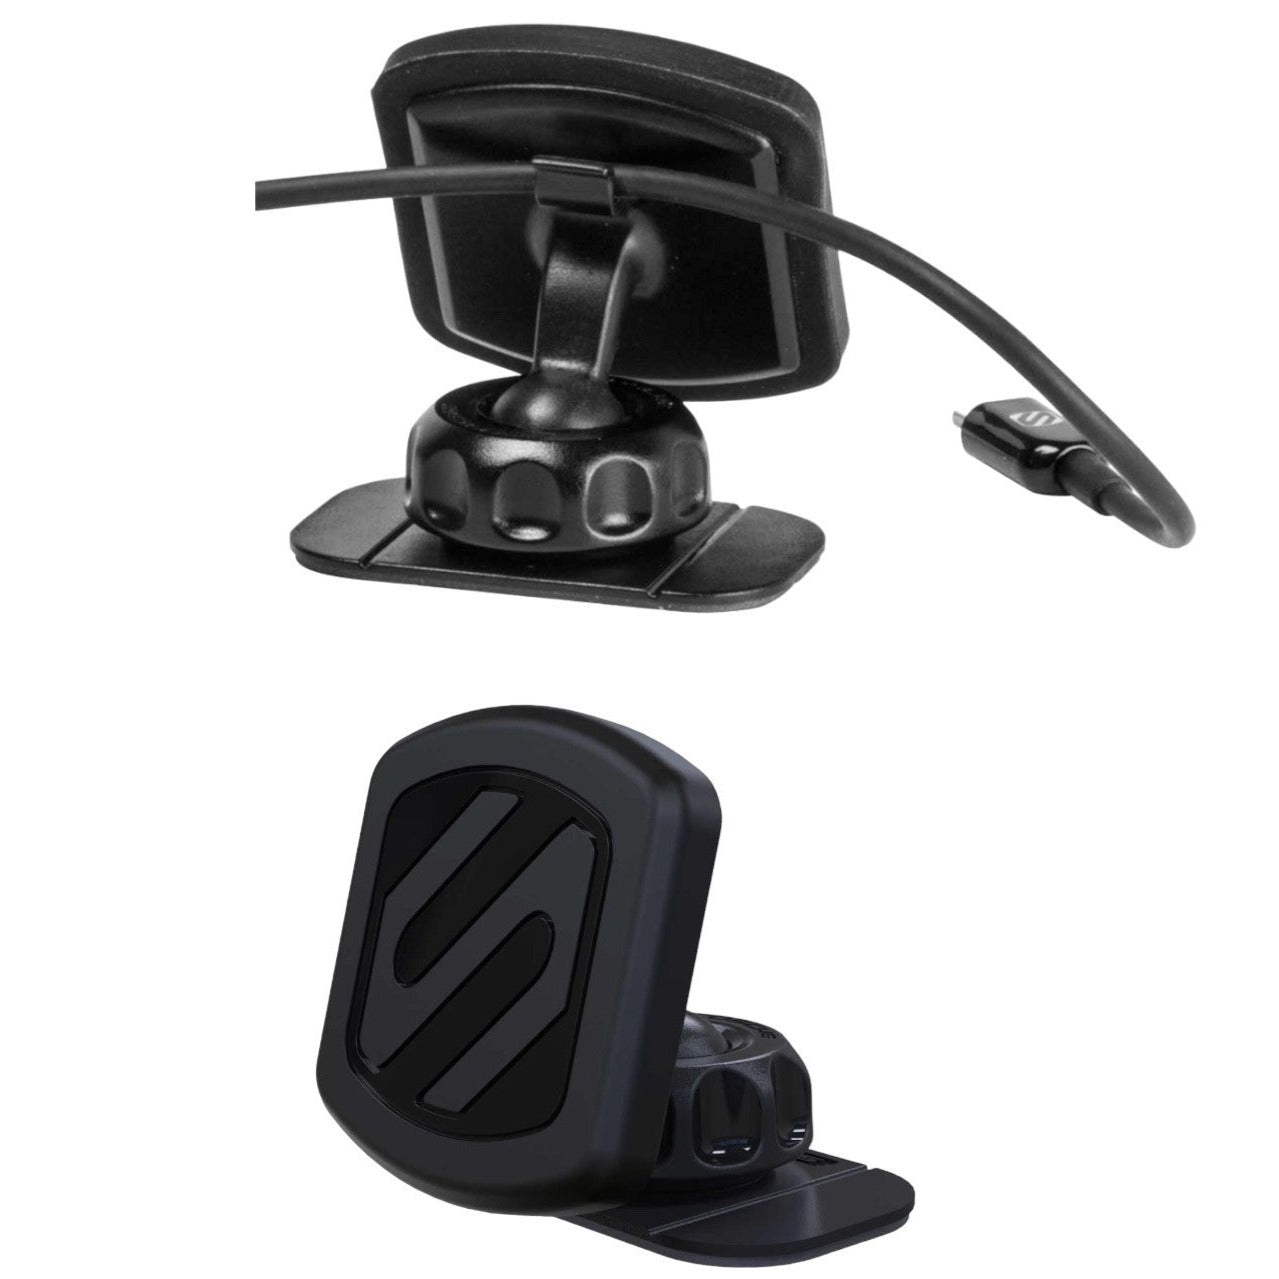 Scosche MagicMount Universal Magnetic Phone Mount For Cars, Home, Or Office, Black